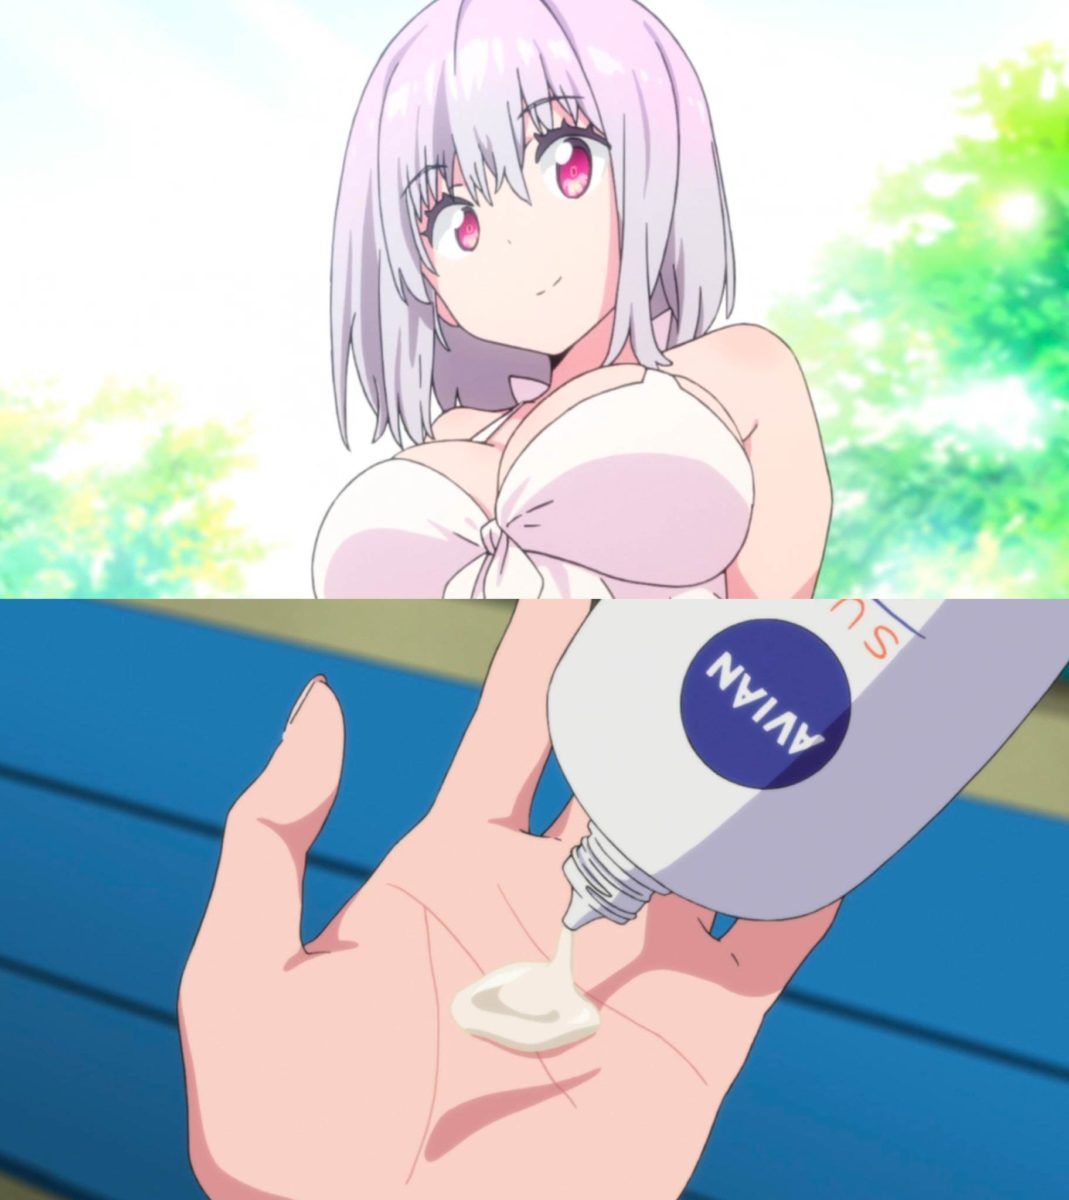 Japan Lotion Girl - Ecchi Japanese Lotion Guide 2018, Your Guide to Lube â€“ J-List Blog